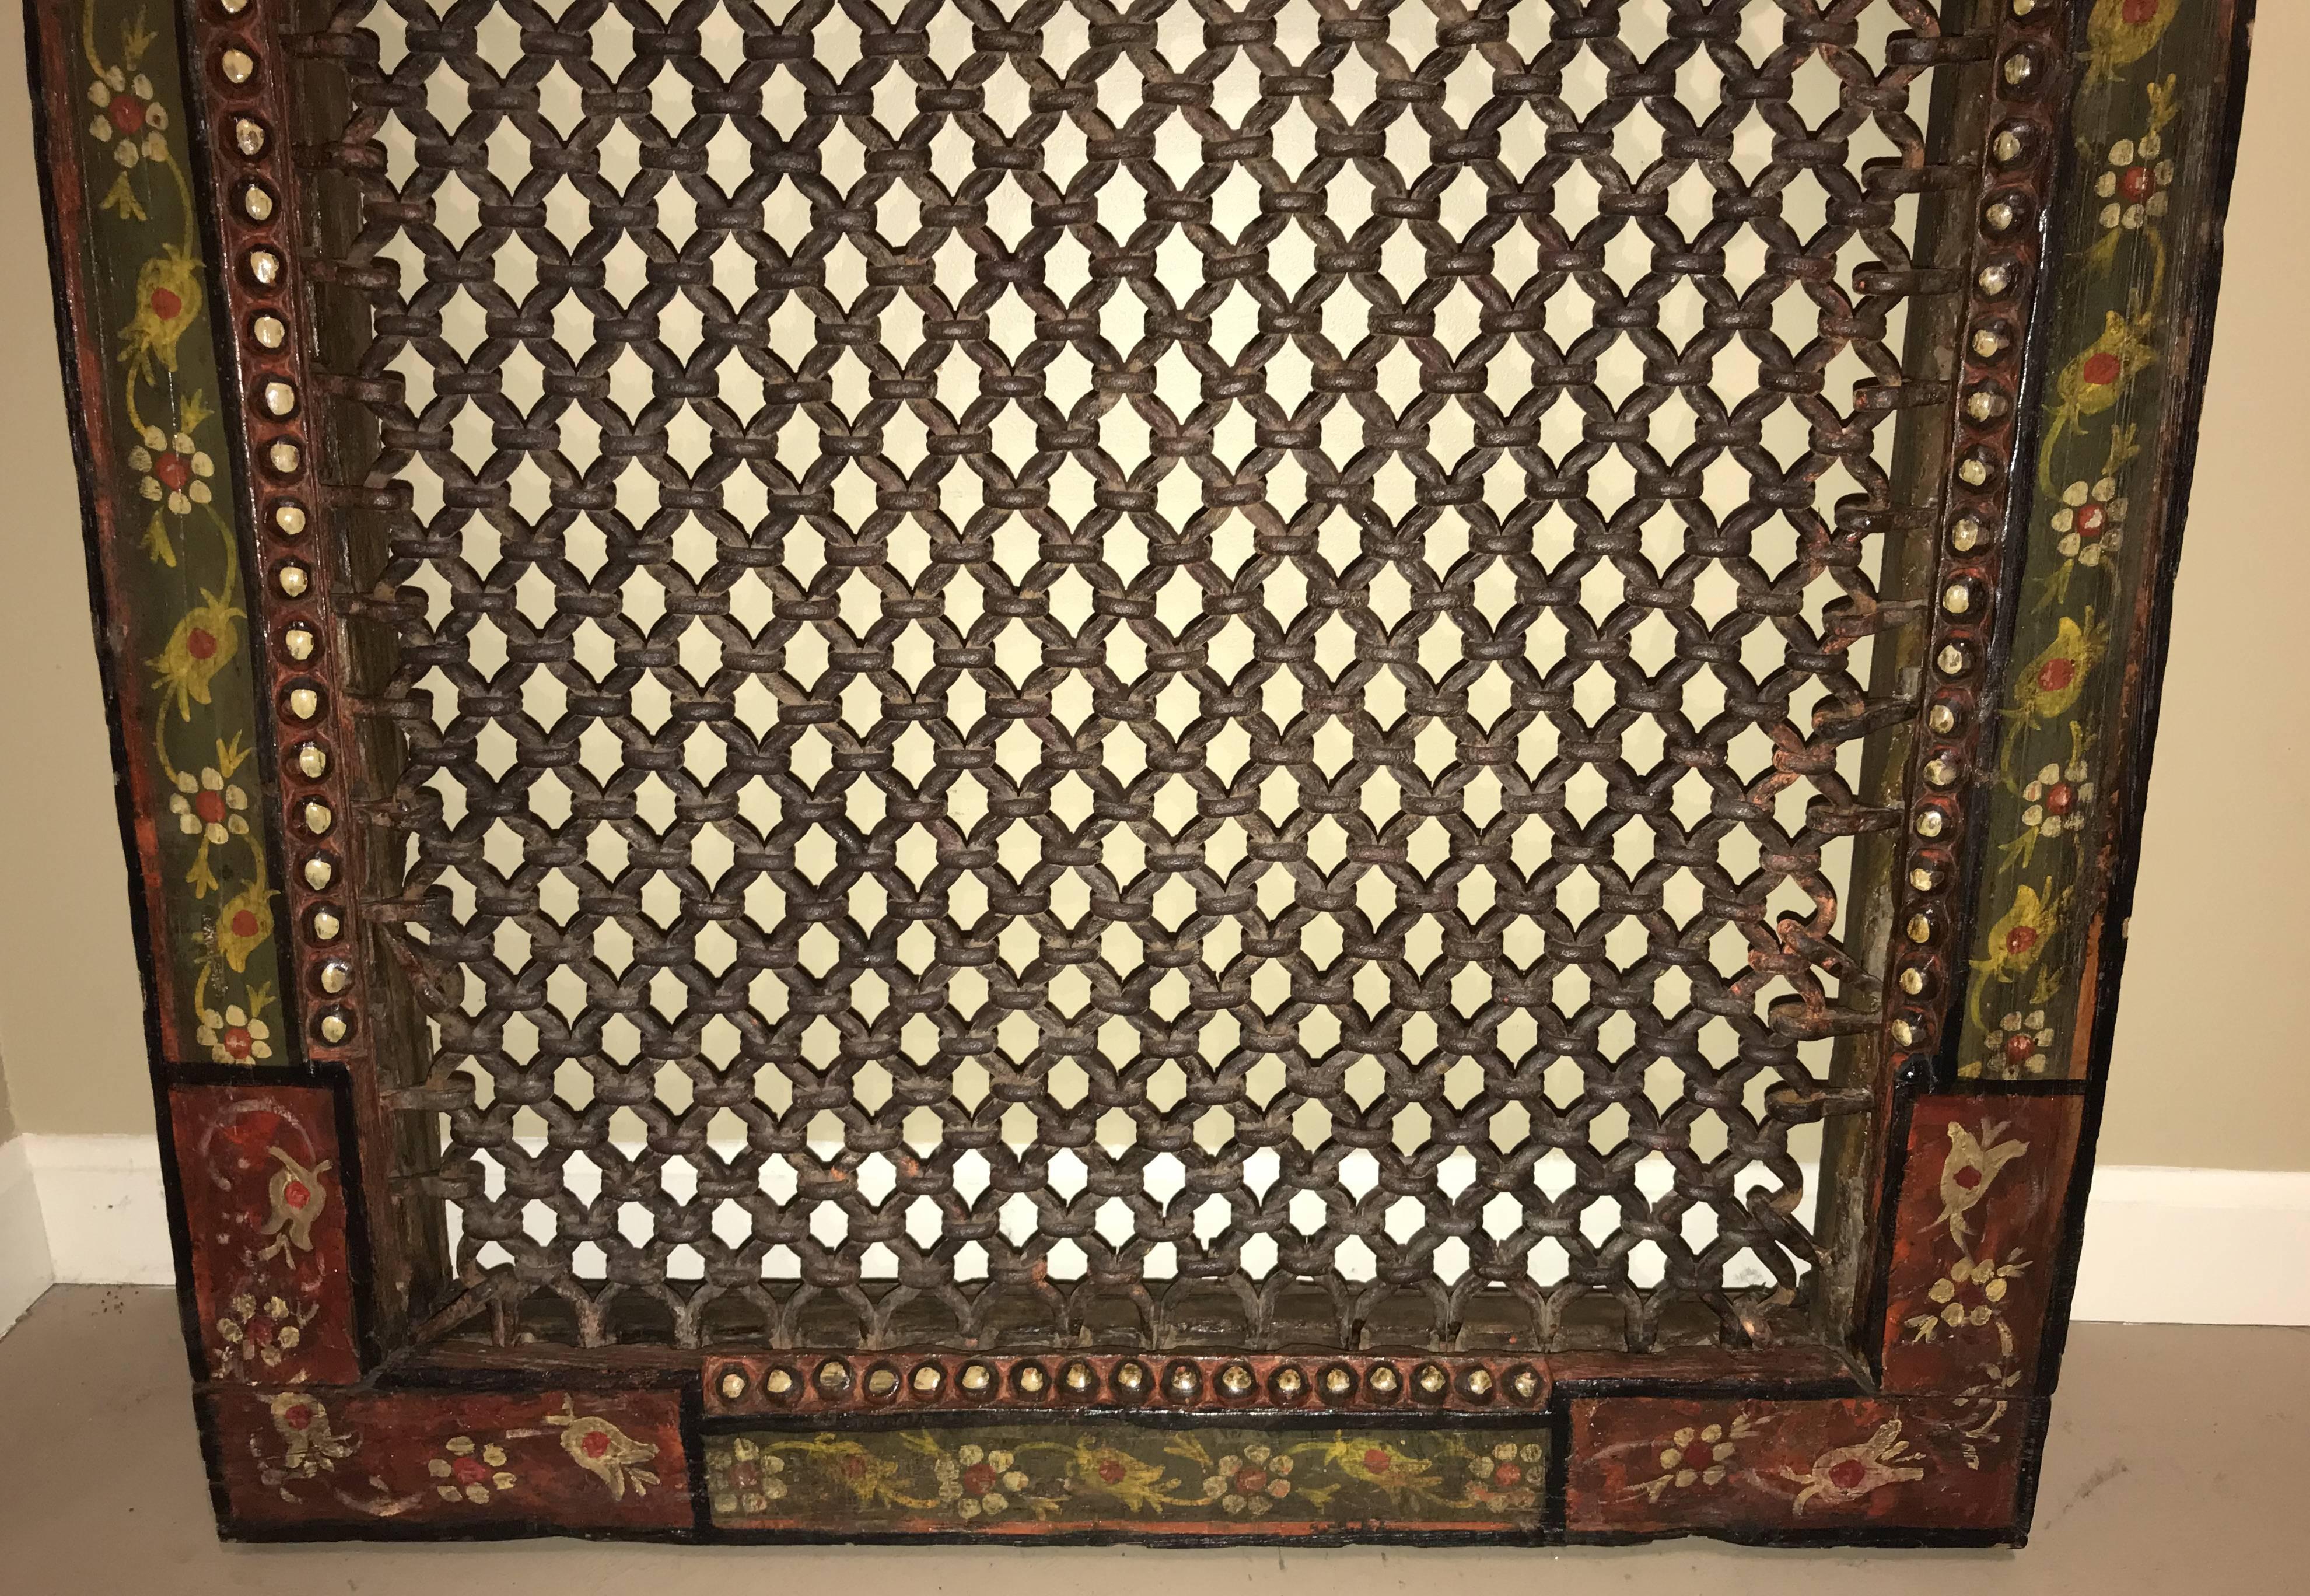 Metalwork 19th Century Indian Polychrome Wood and Wrought Iron Surround or Panel